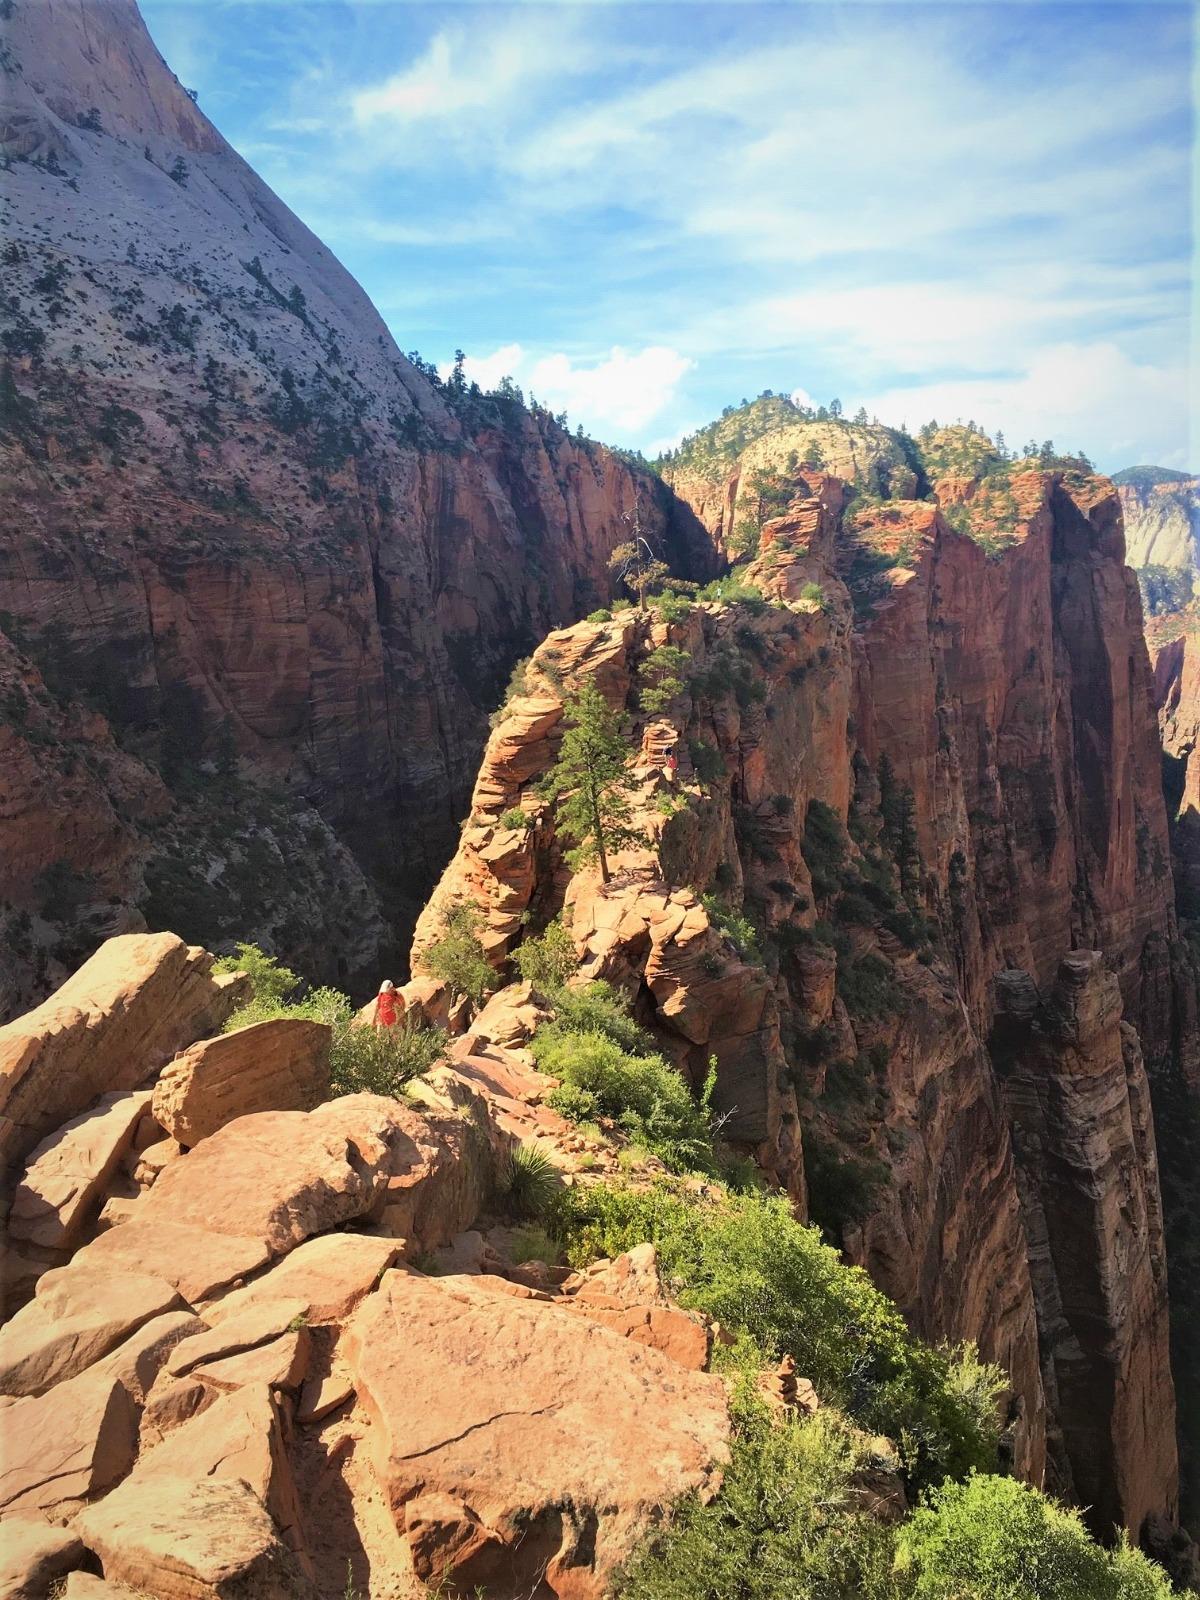 Hiking Angel's Landing at Zion National Park